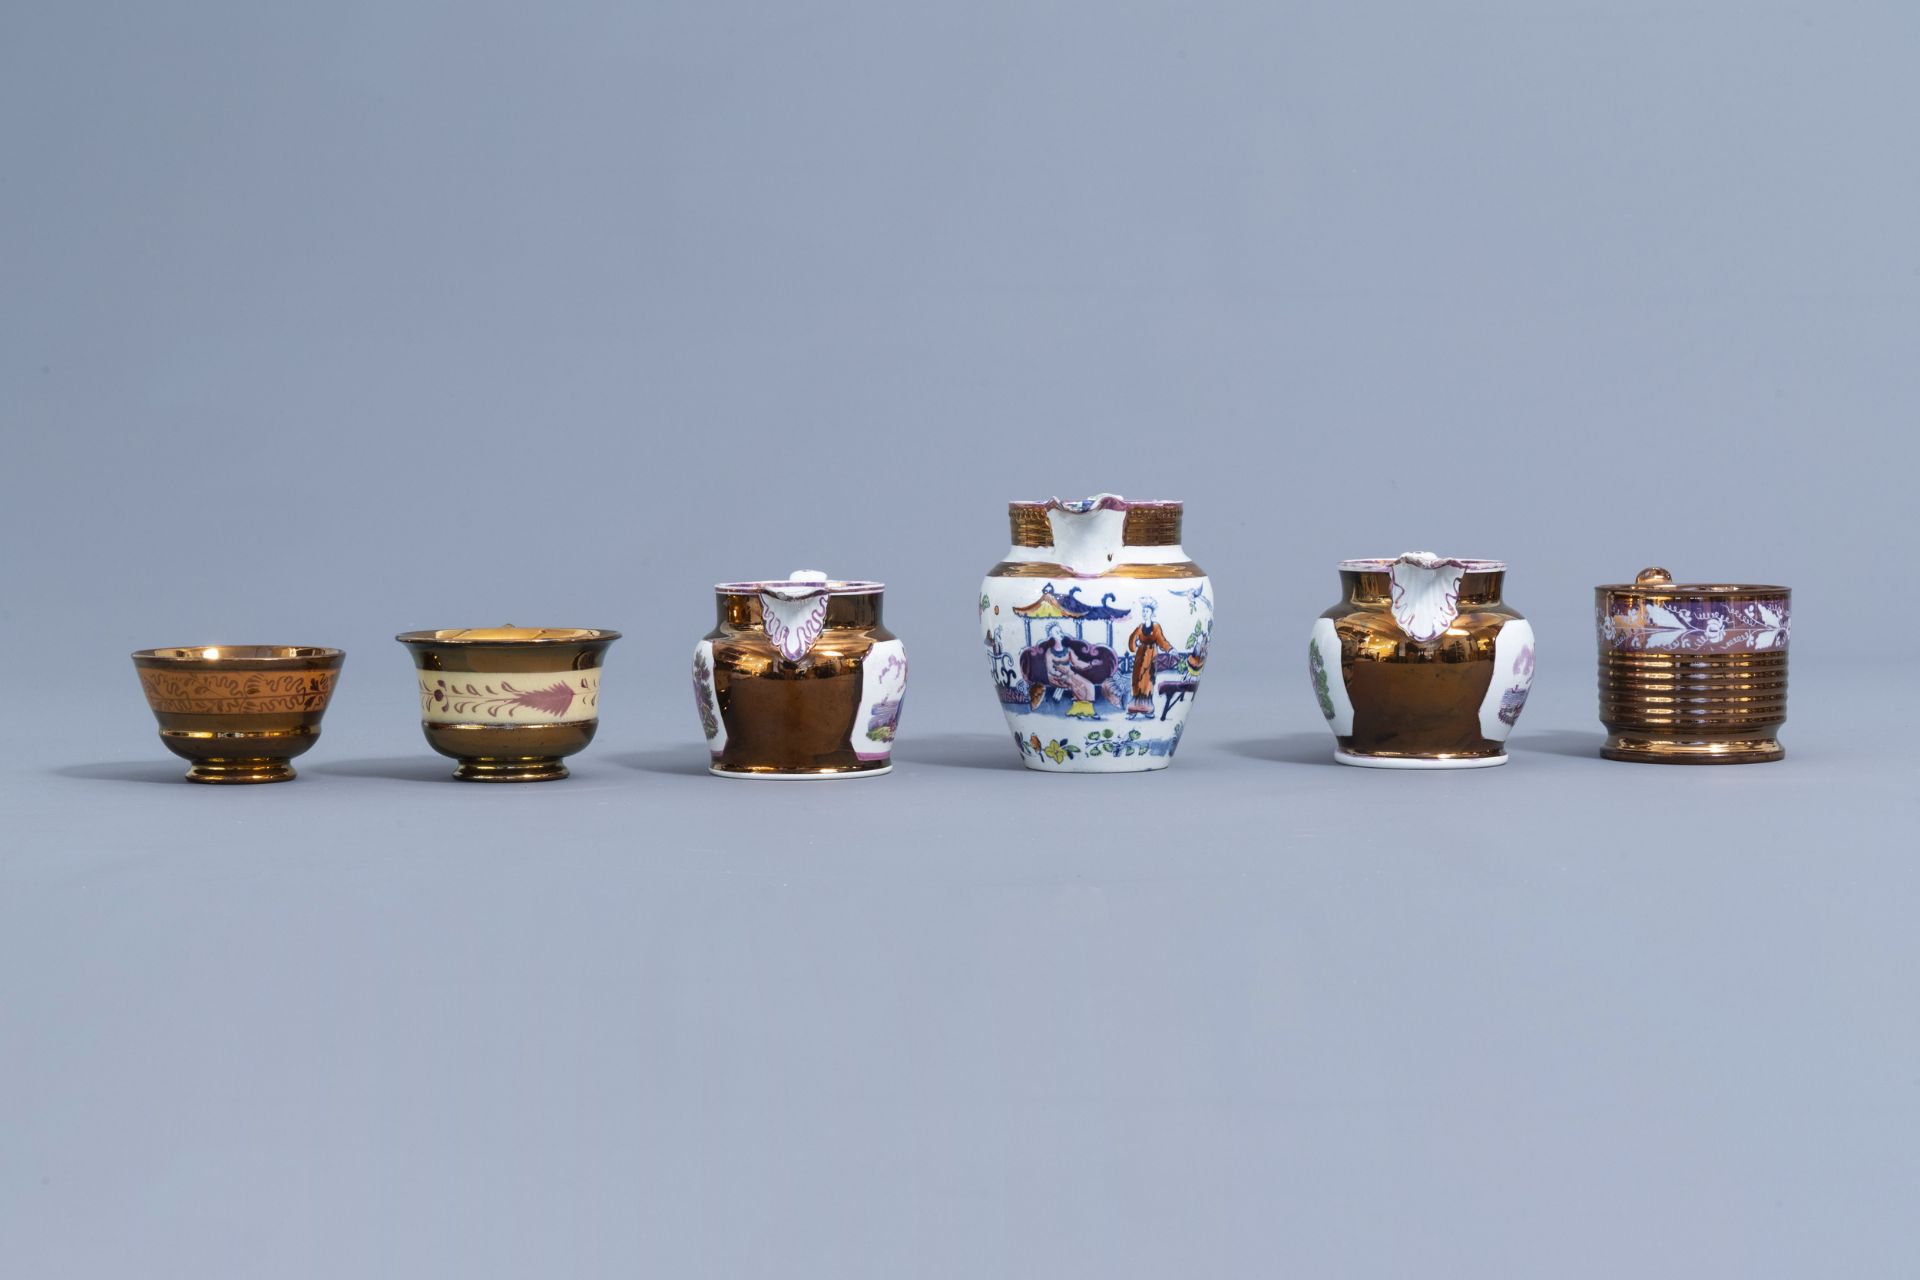 A varied collection of English lustreware items, 19th C. - Image 22 of 44